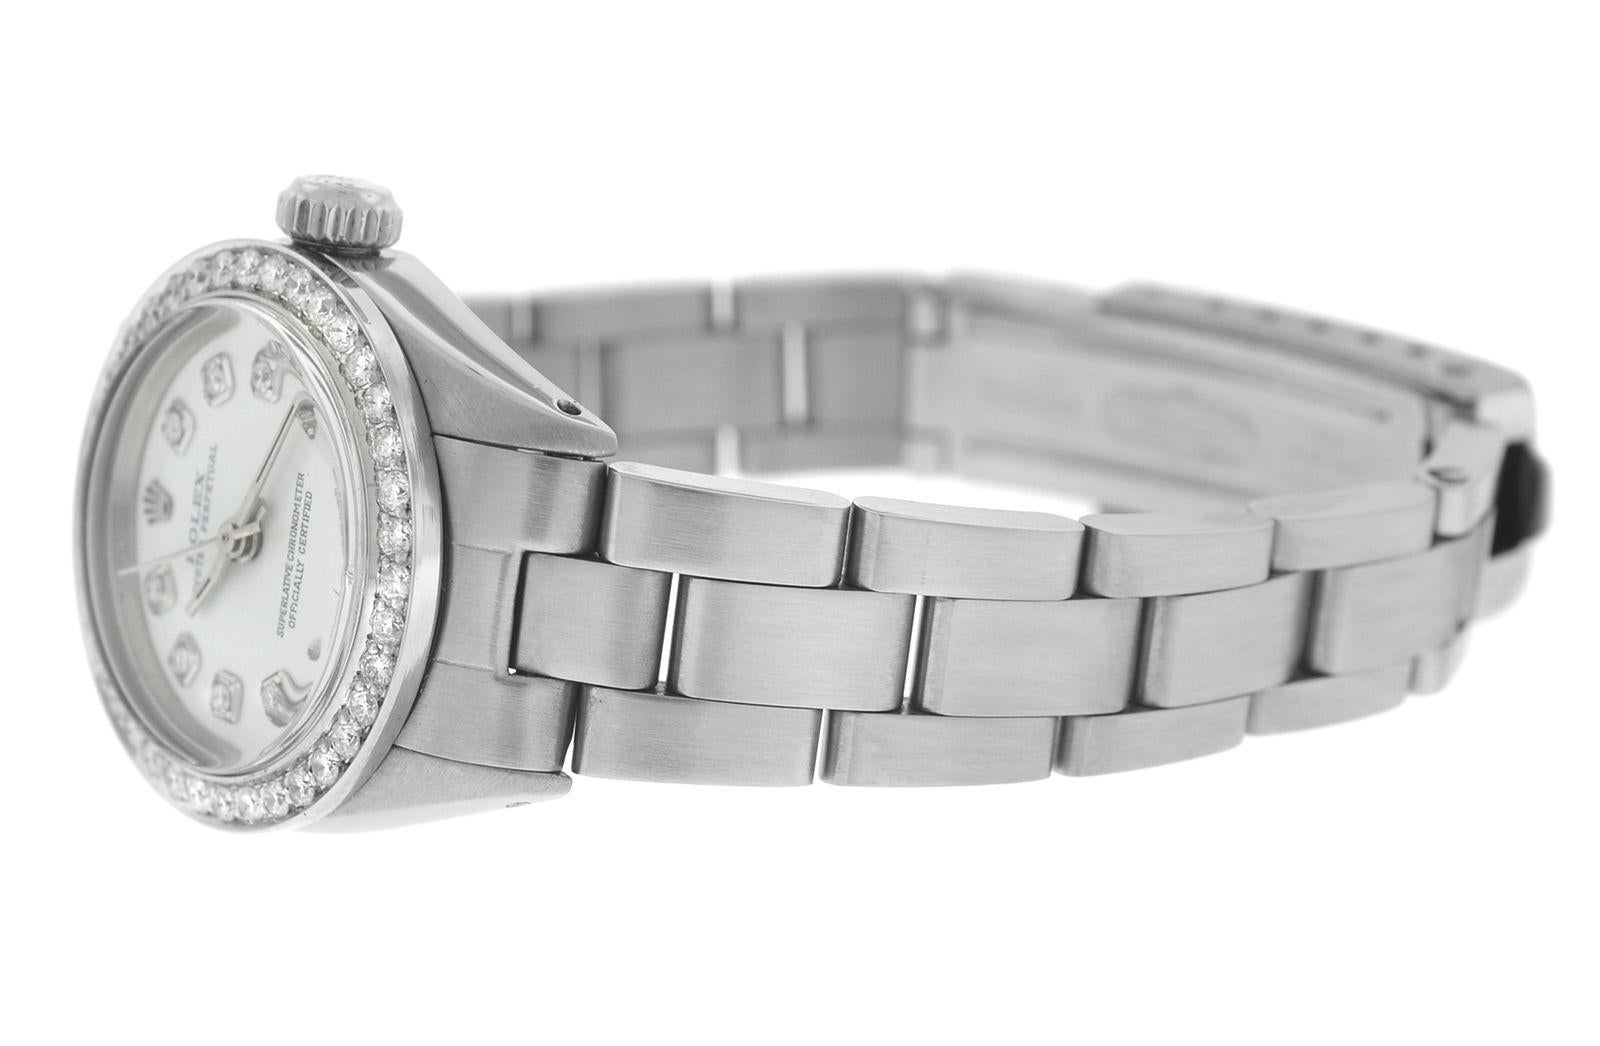 Ladies Rolex Oyster Perpetual 6718 Stainless Steel Diamond Watch 3